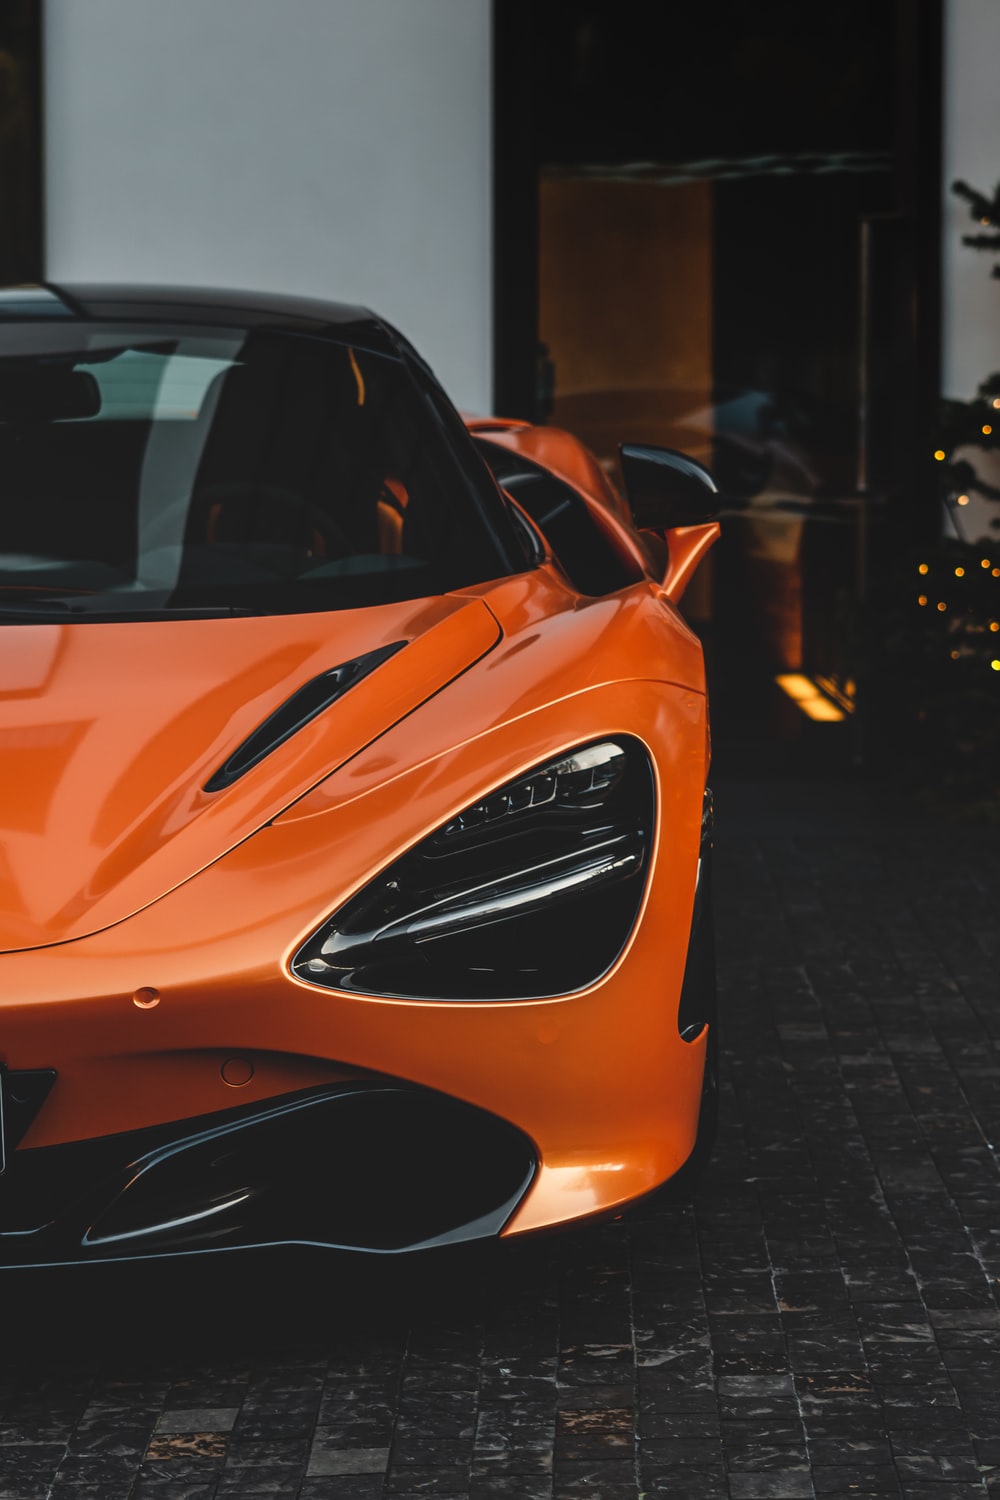 Mclaren Picture [HQ]. Download Free Image